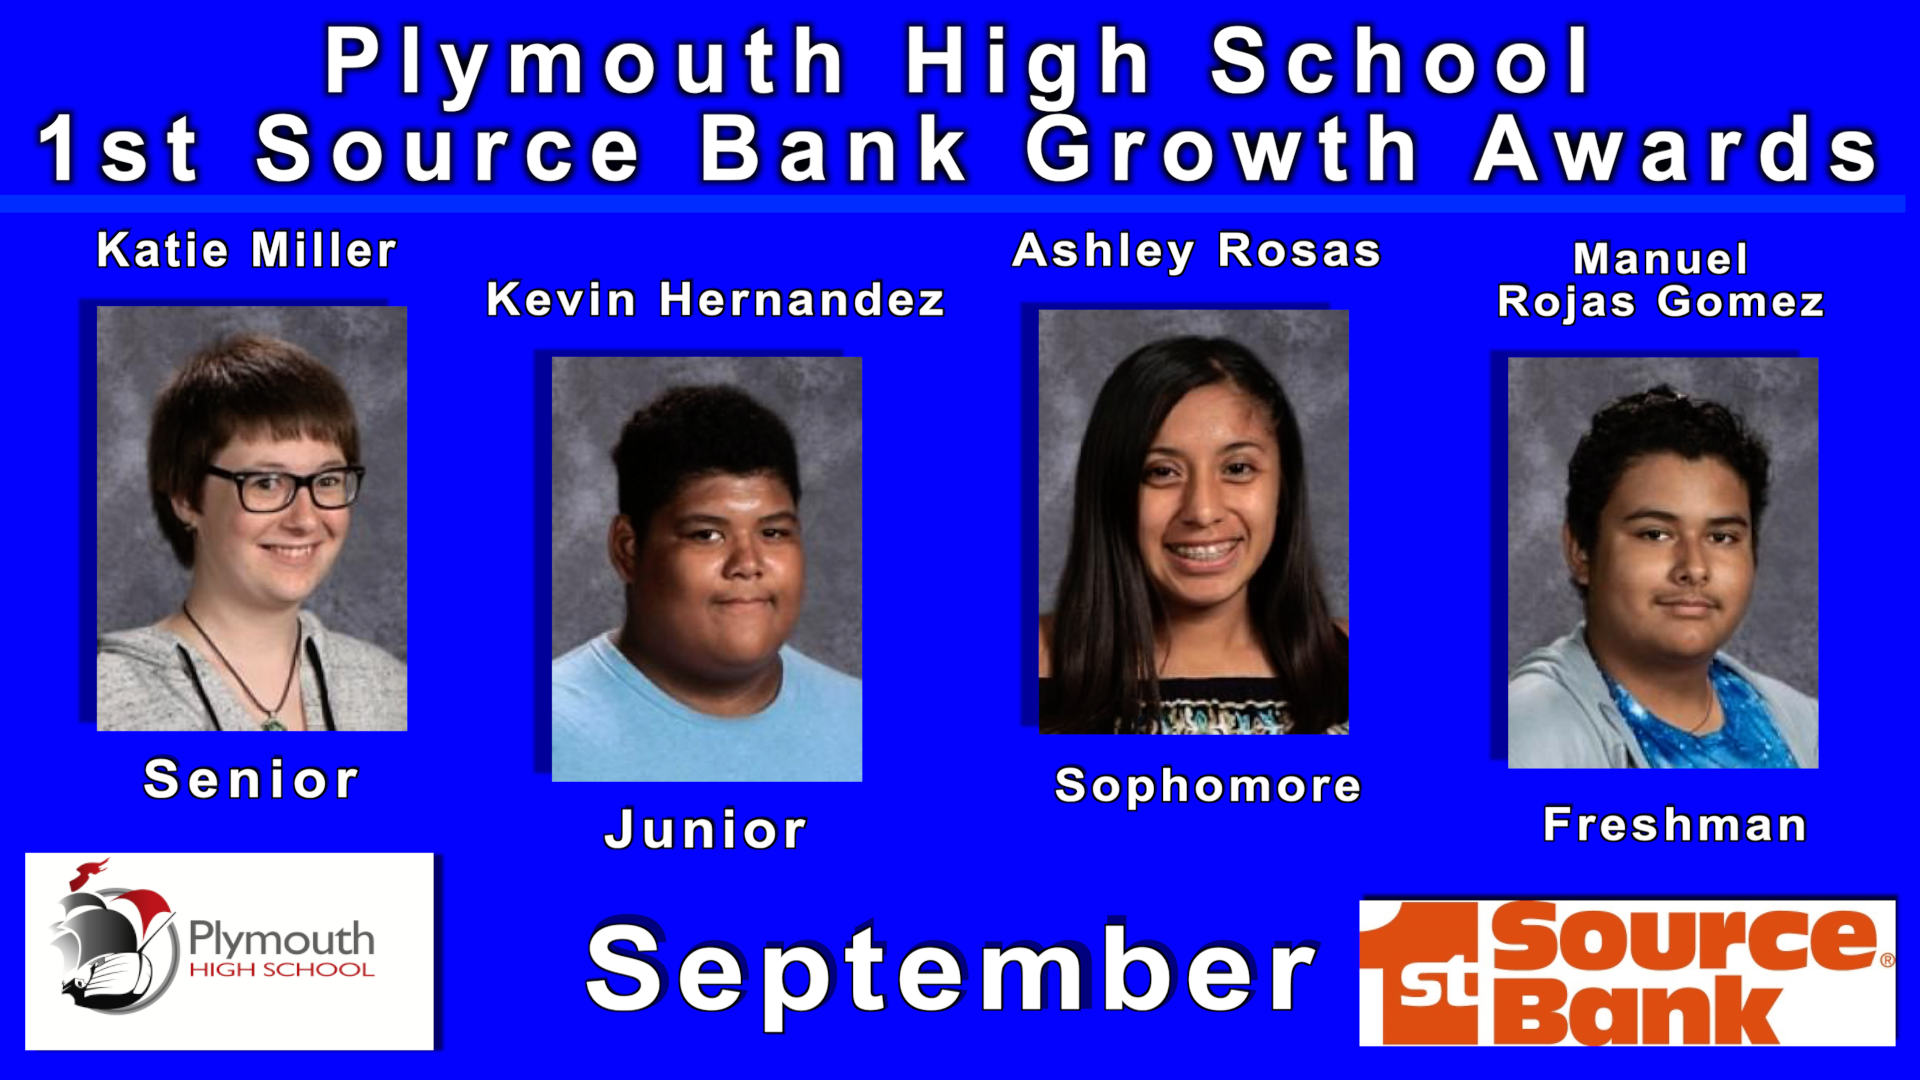 1st Source Bank Growth Awards for September